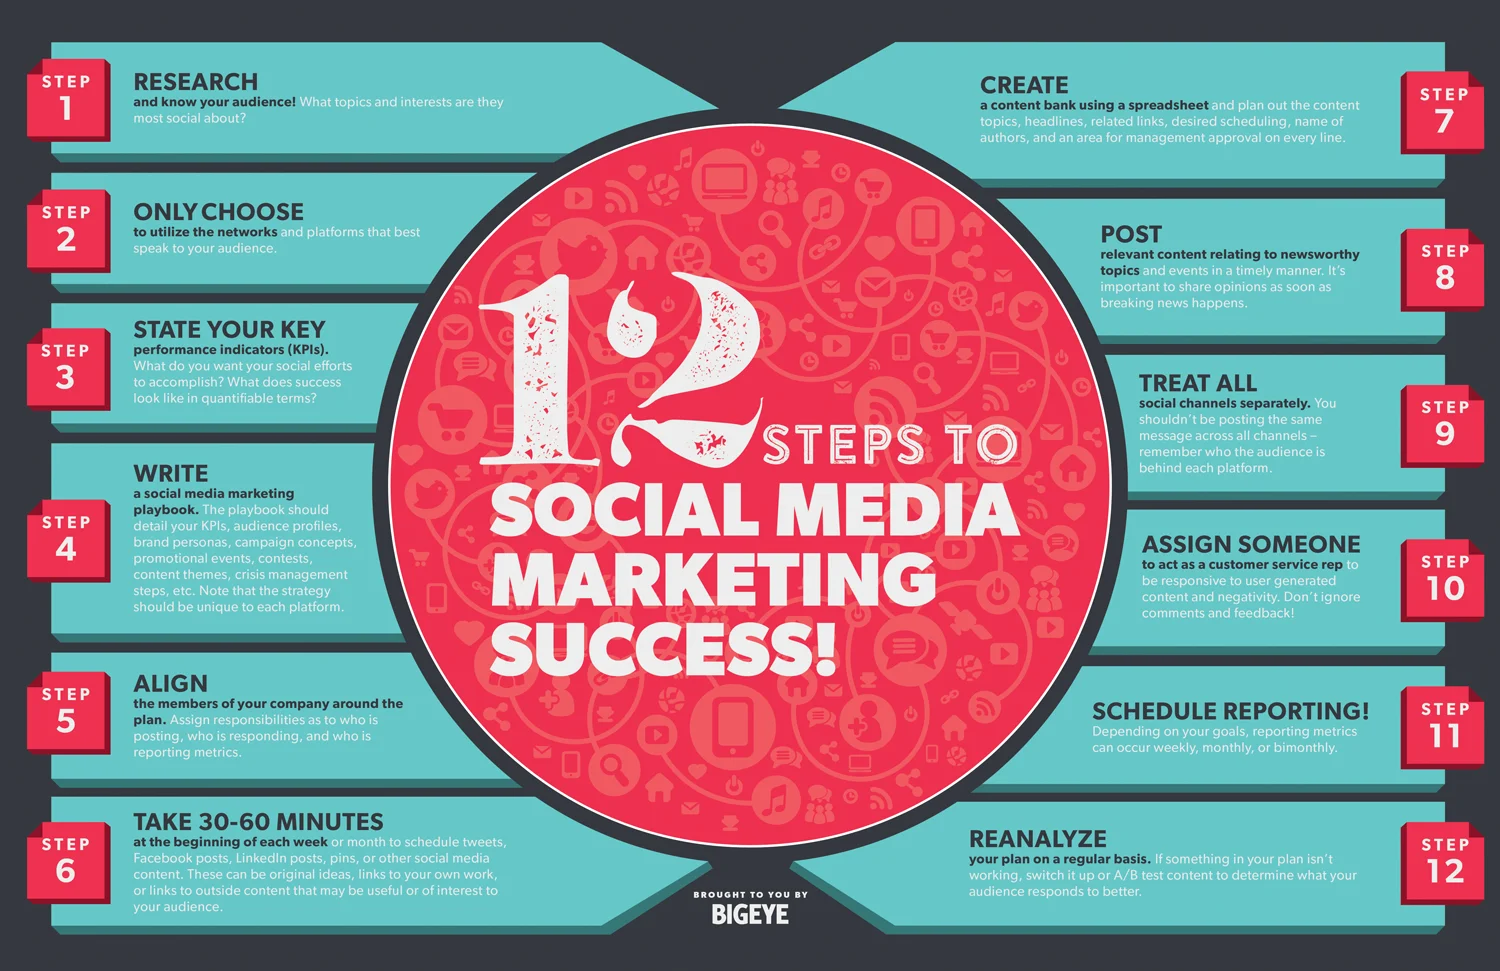 12 Steps To Social Media Marketing Success for your small business - #Infographic 